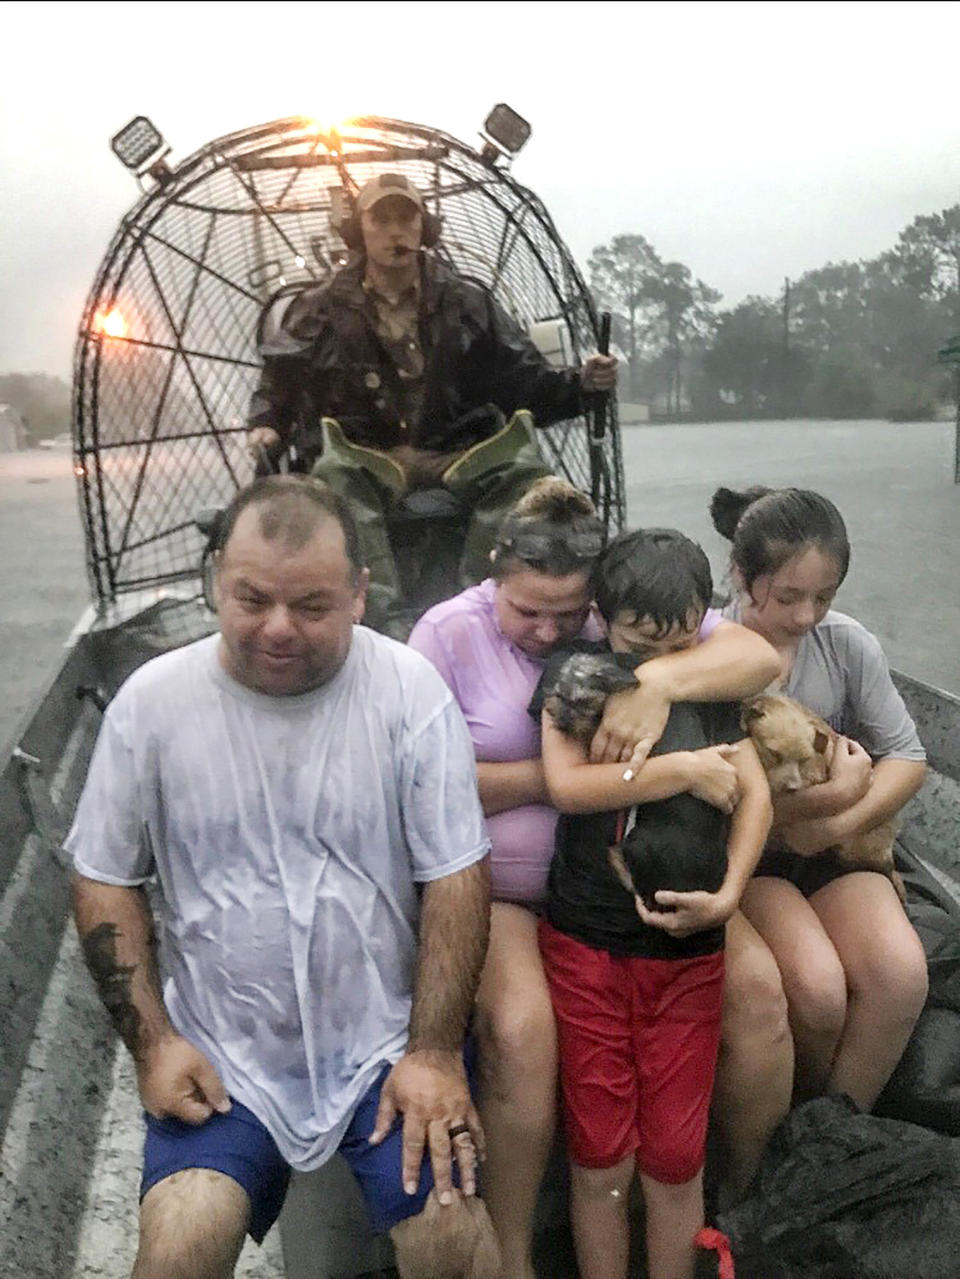 In this photo provided by the Texas Parks & Wildlife Department, a family is rescued via fan boat by a member of the department from the flood waters of Tropical Depression Imelda near Beaumont, Texas, Thursday, Sept. 19, 2019. (Texas Parks & Wildlife Department via AP)